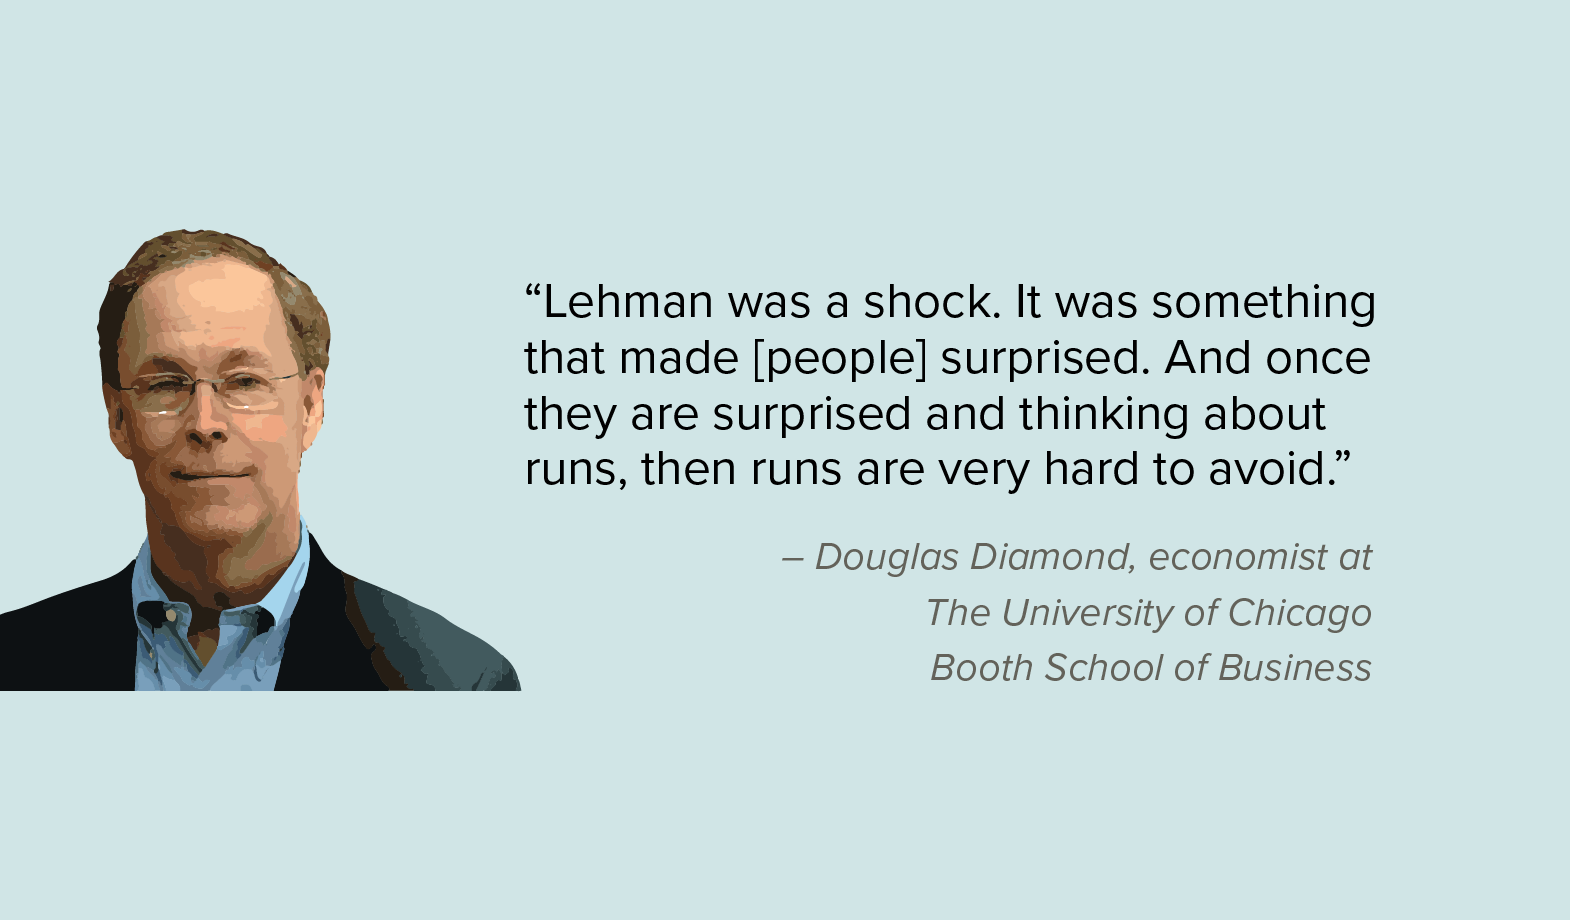 “Lehman was a shock. It was something that made [people] surprised. And once they are surprised and thinking about runs, then runs are very hard to avoid.“ 